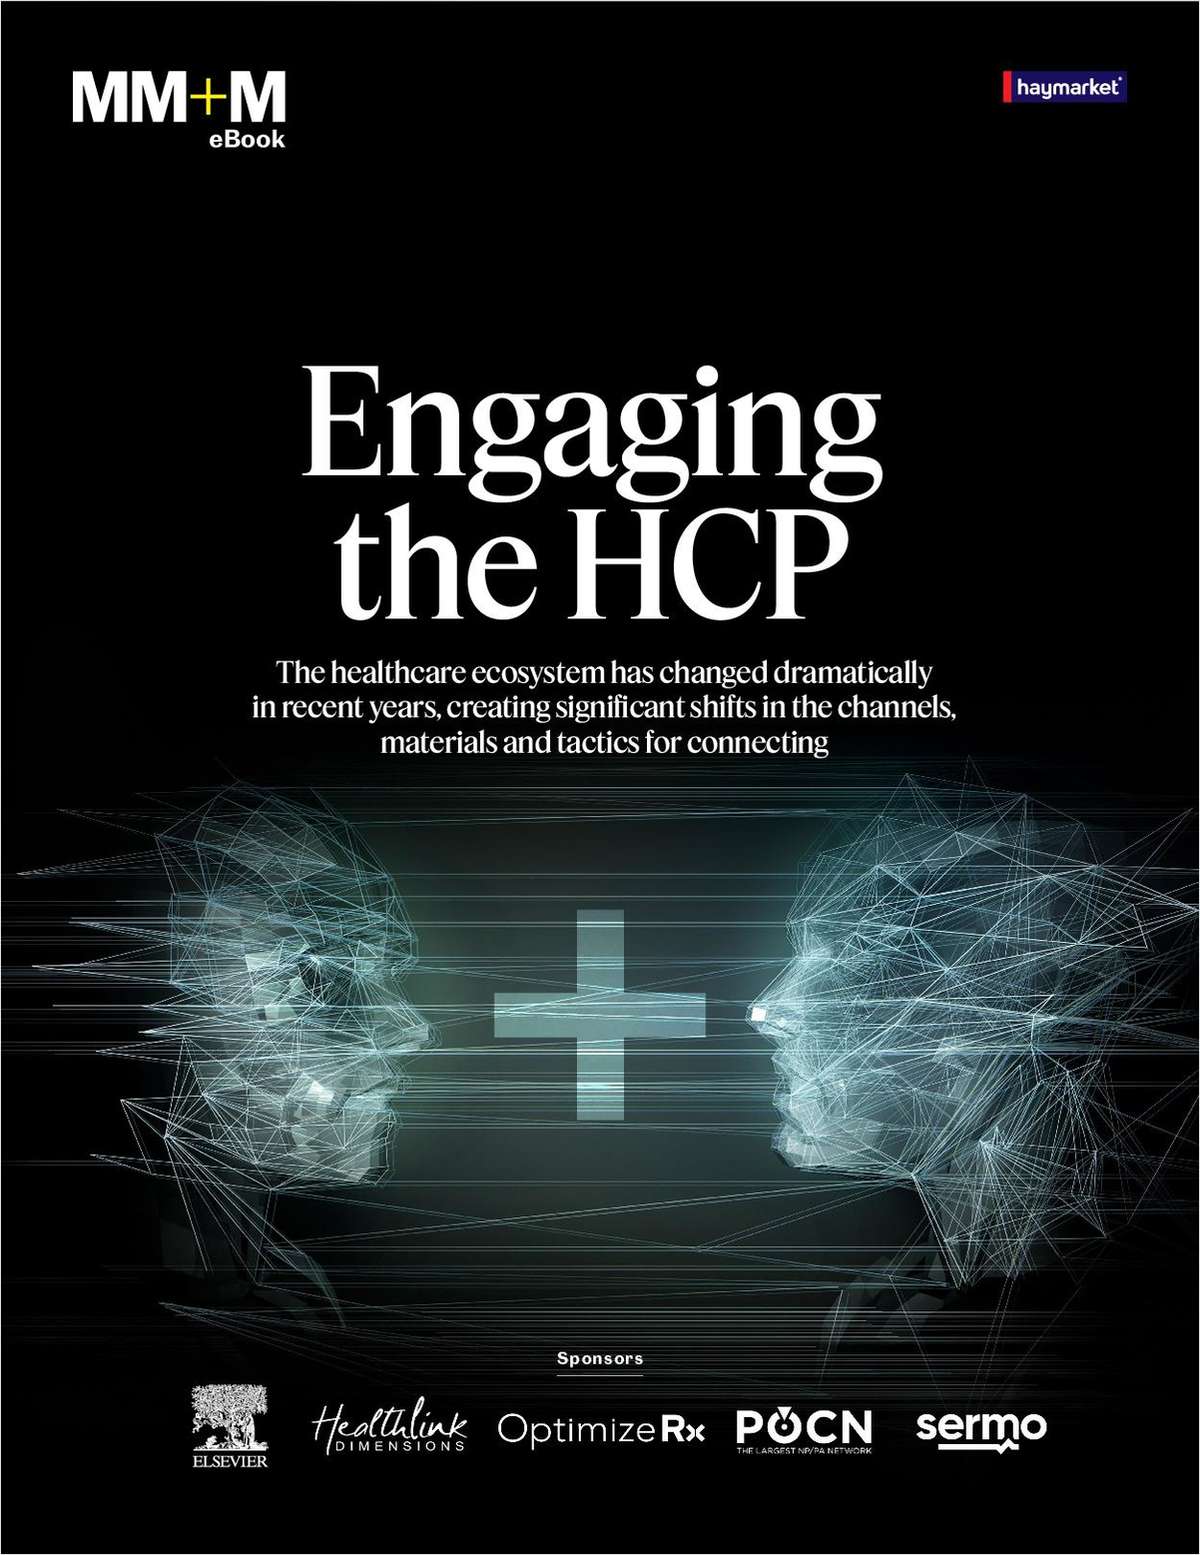 Engaging the HCP